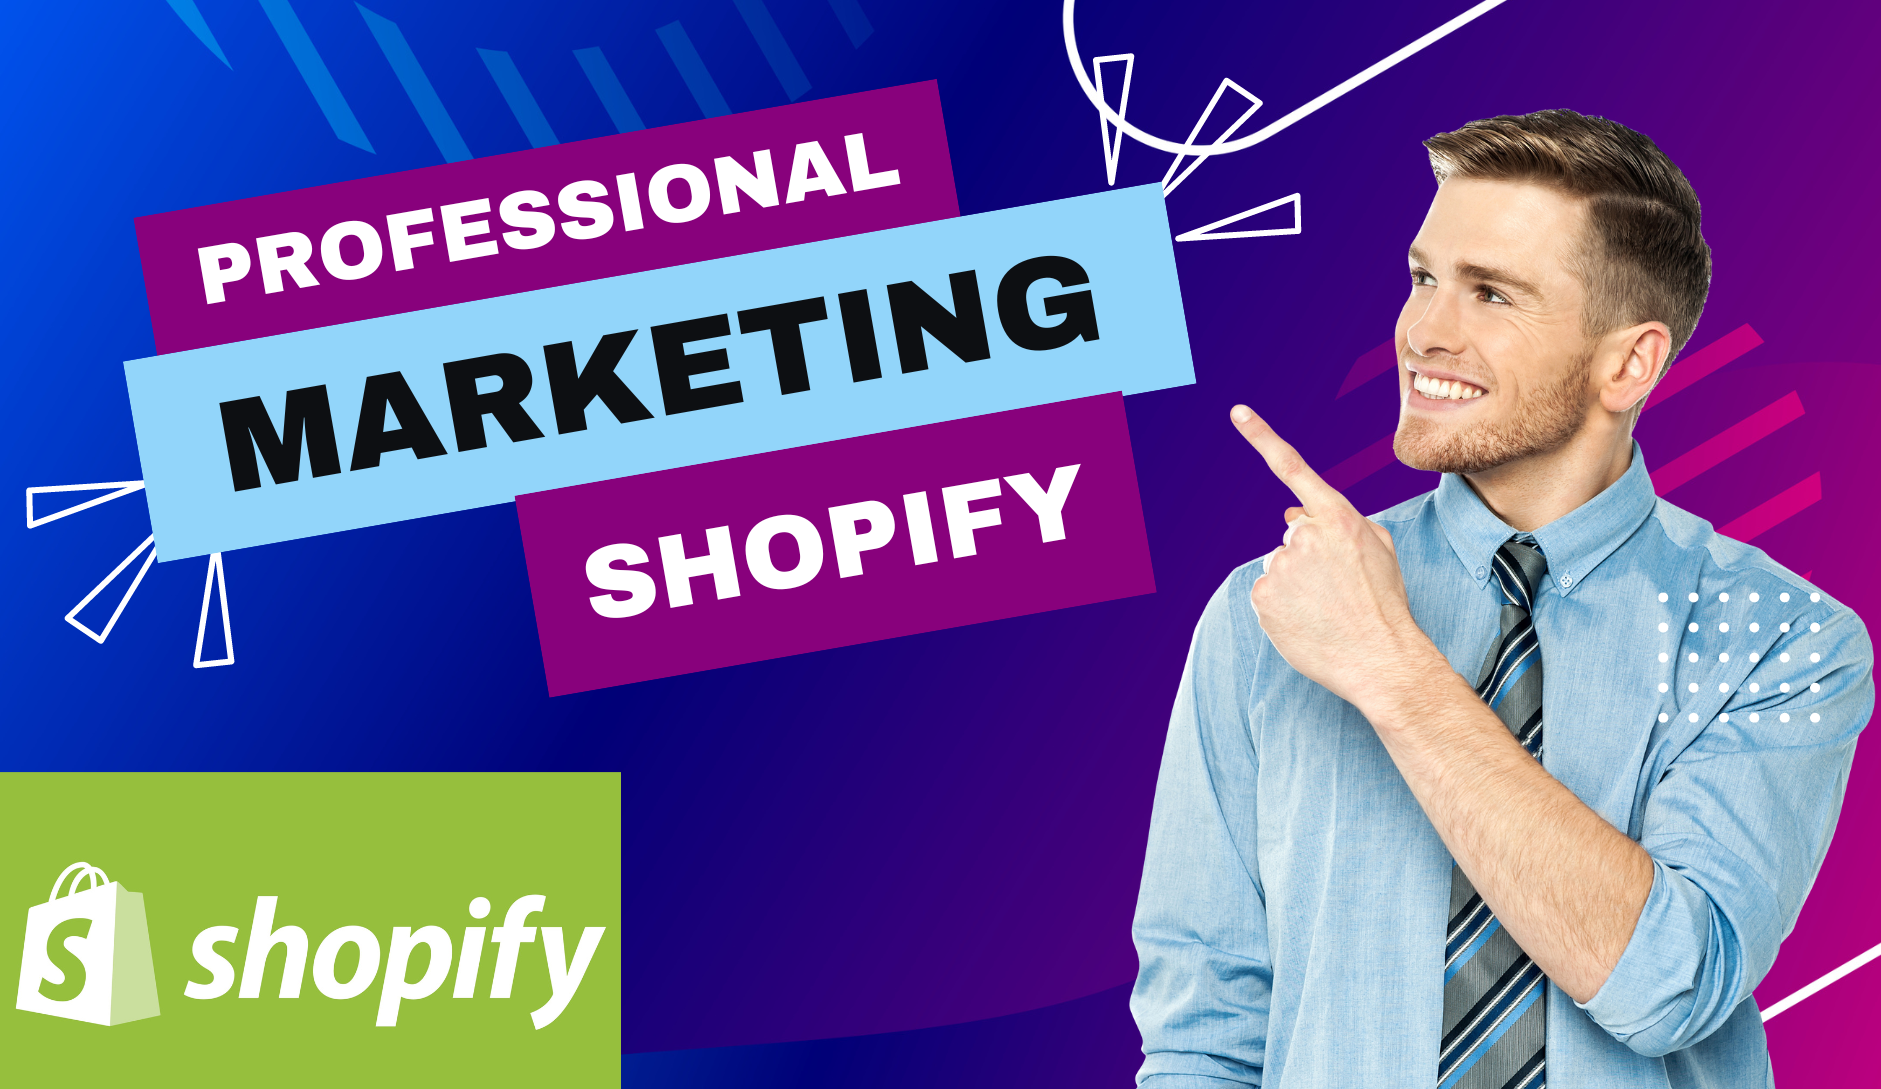 168191I will do shopify marketing, sales funnel, shopify promotion, boost shopify sale